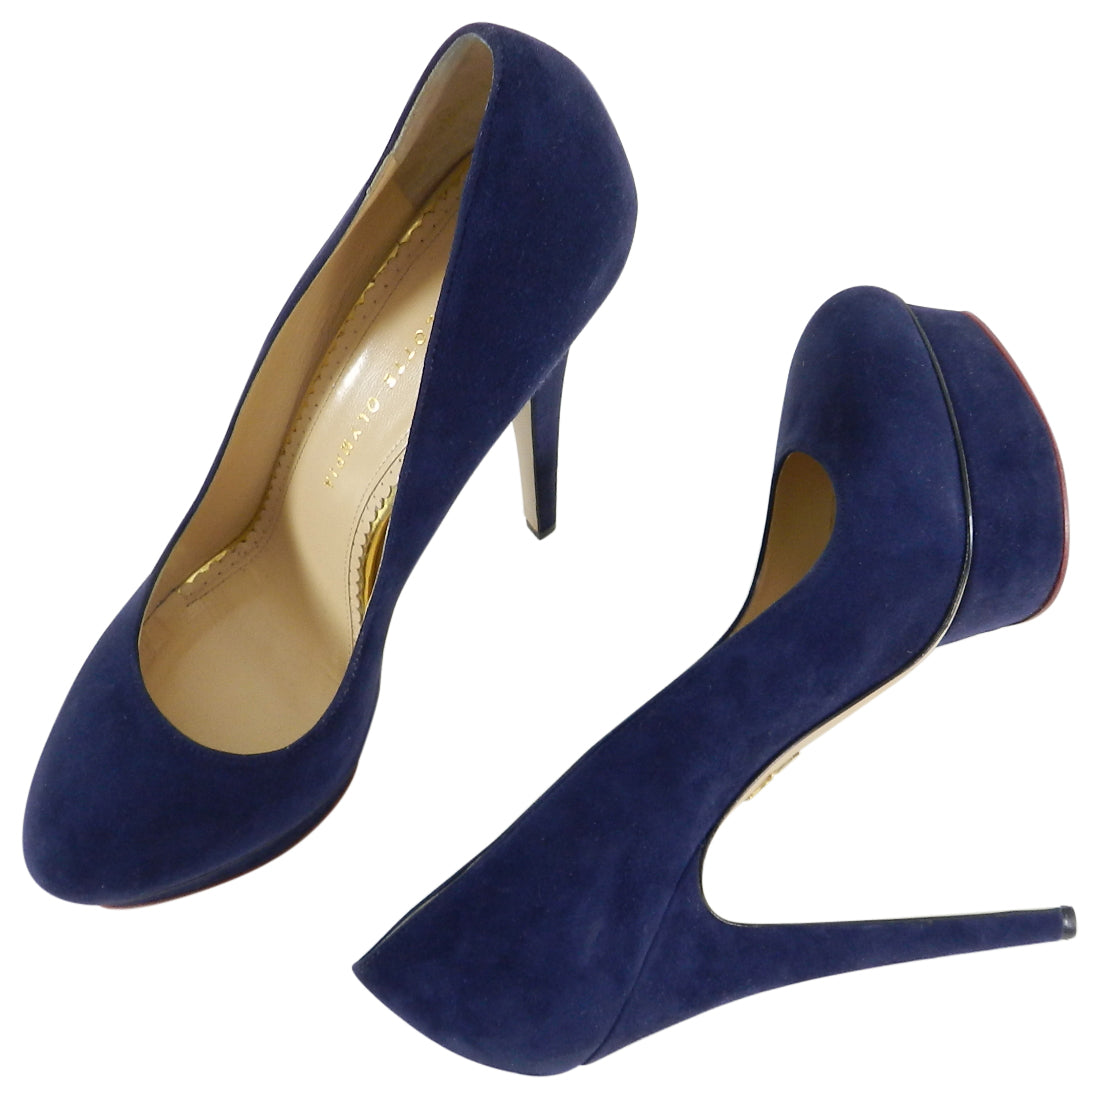 Charlotte Olympia Navy Suede Dolly Platform Pumps - 40